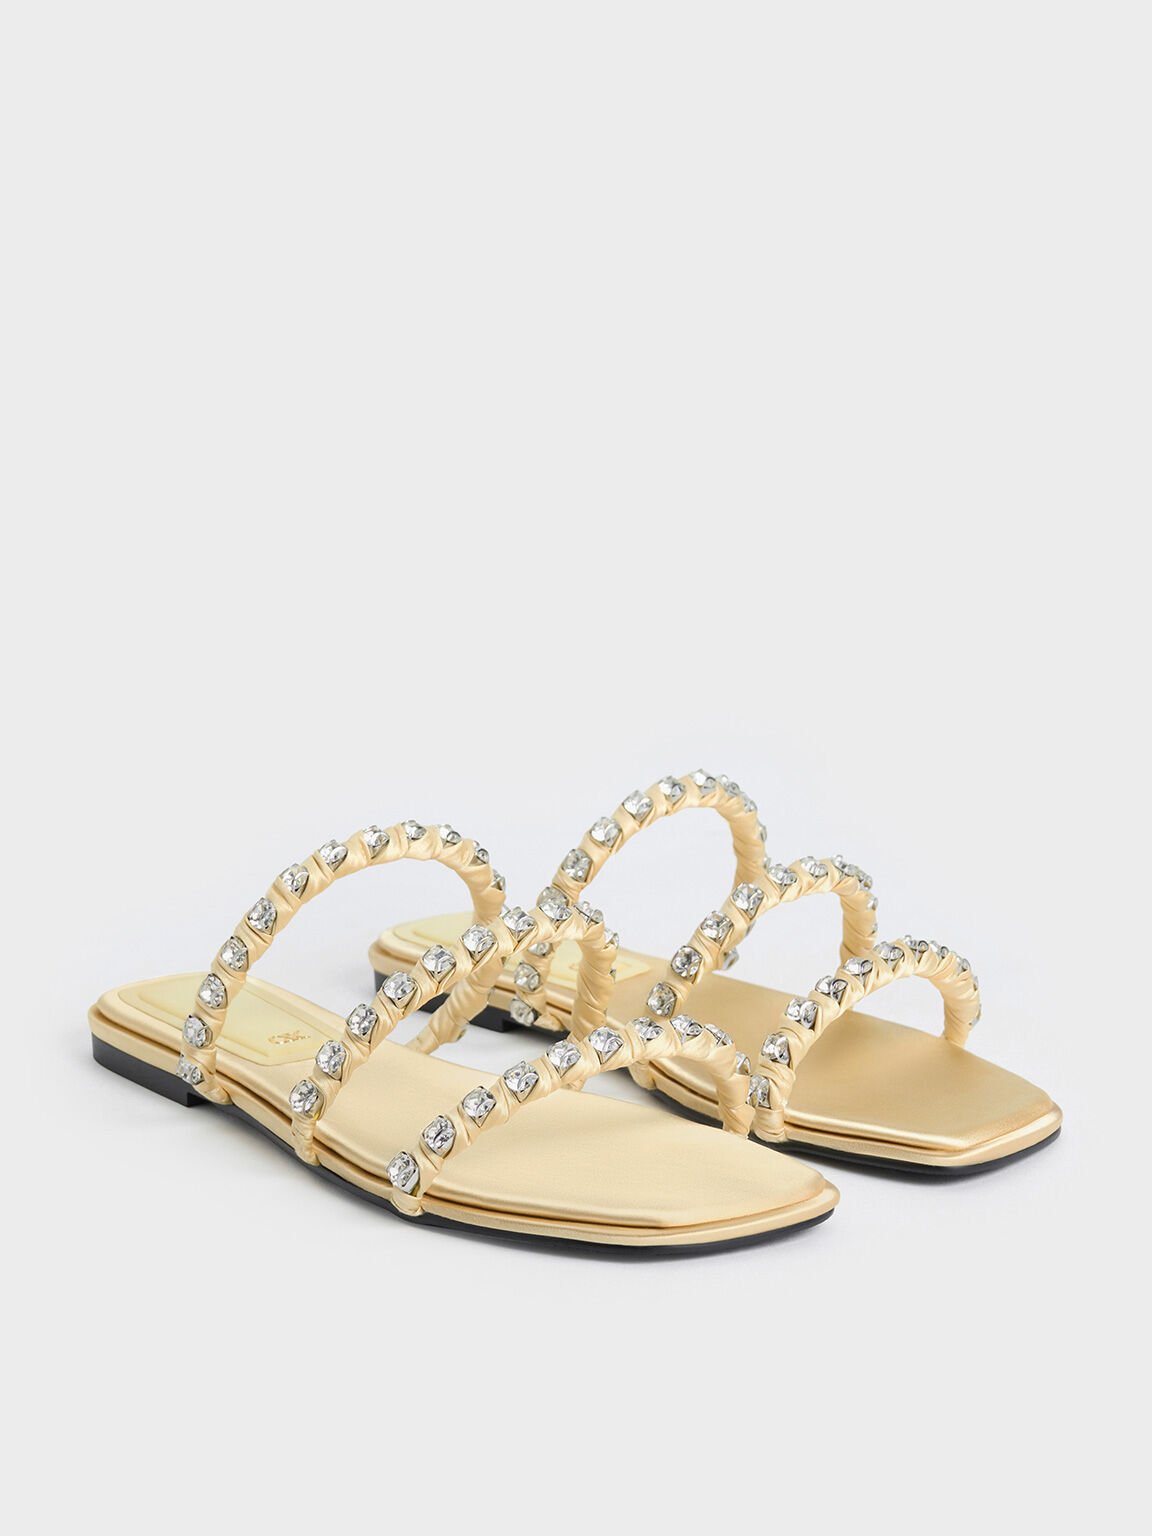 Goldie Recycled Polyester Gem-Encrusted Slide Sandals, Yellow, hi-res